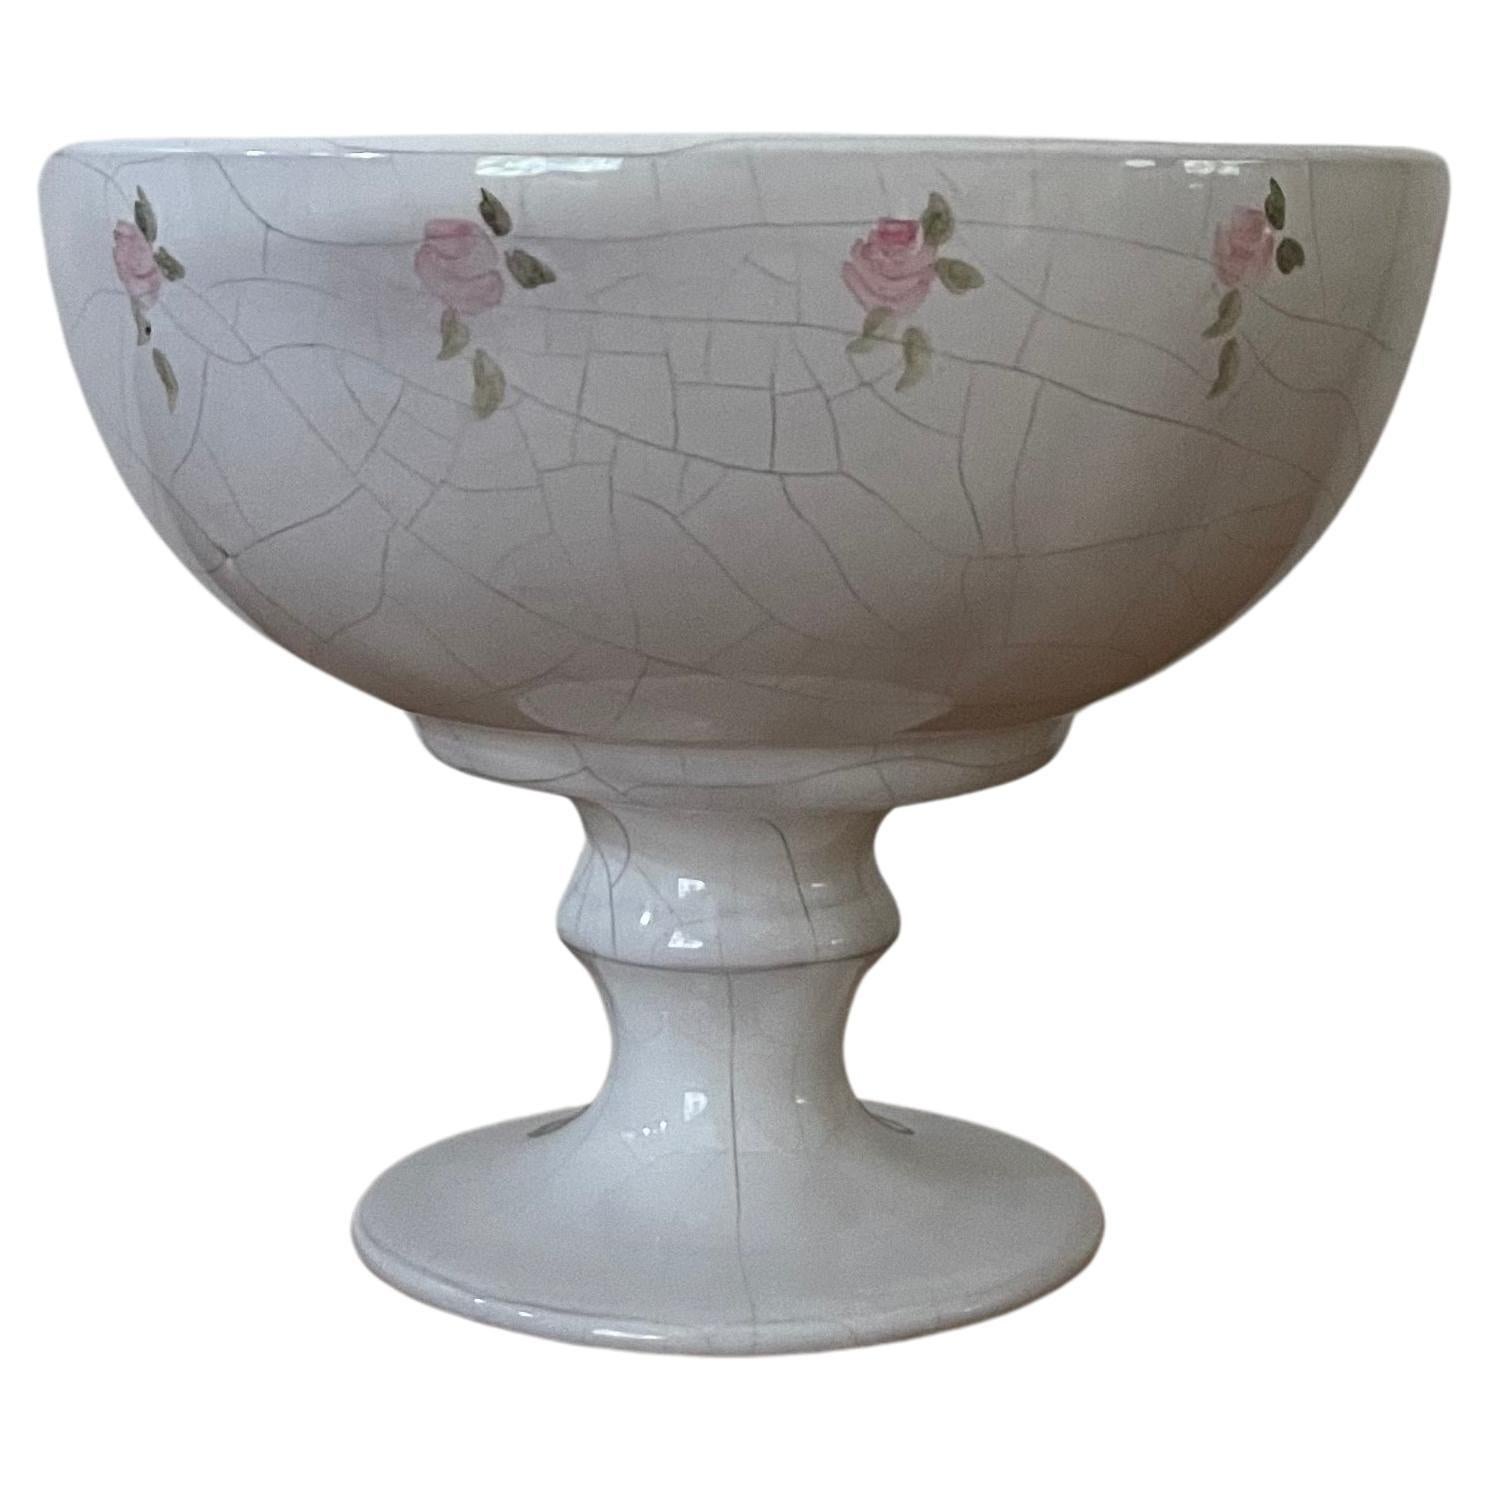 French Crackle Ceramic Footed Bowl